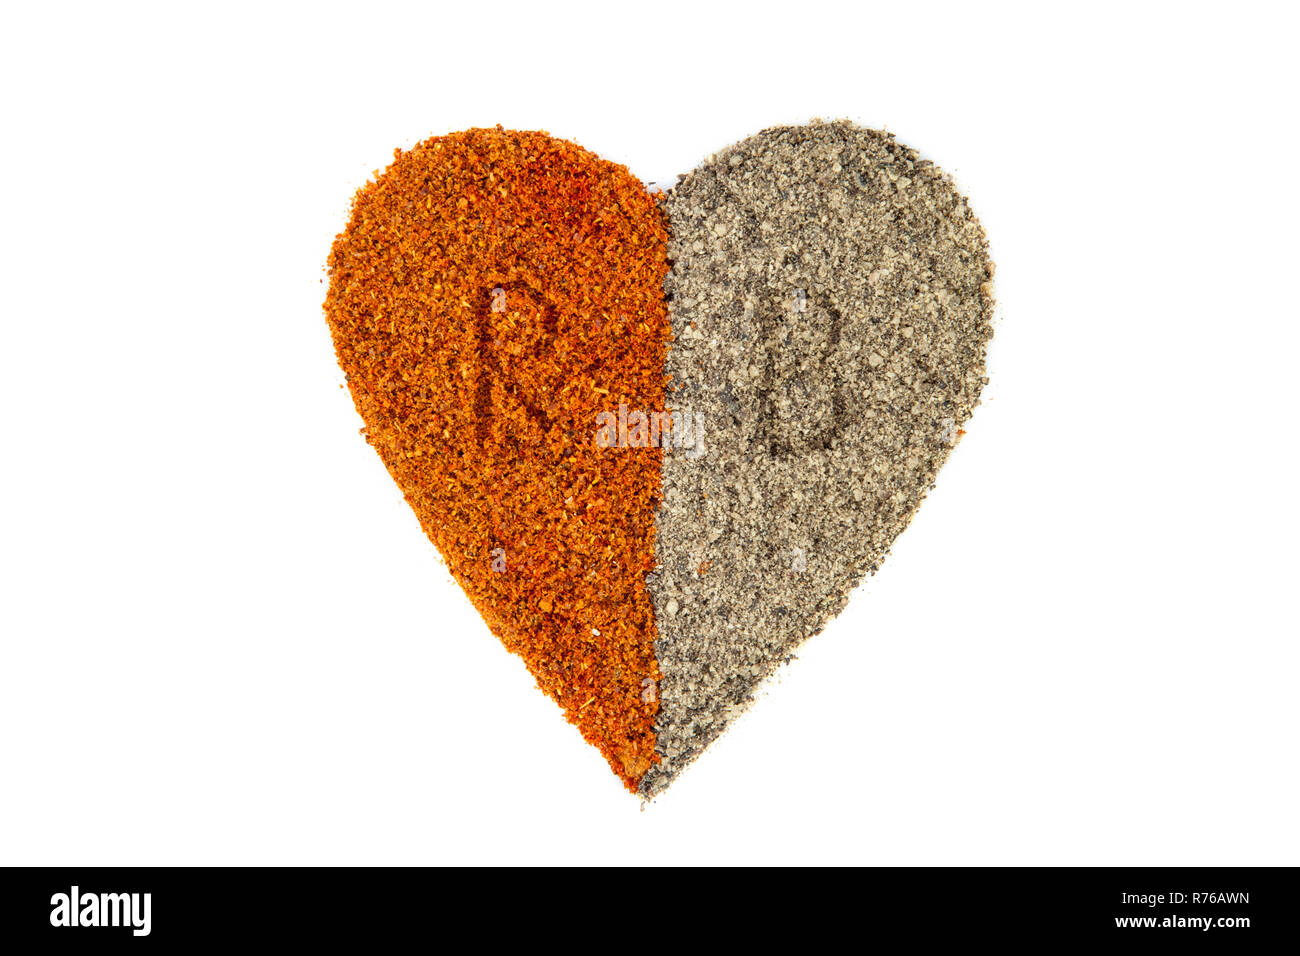 Heart shape made of red and black pepper powder with the letters R ...